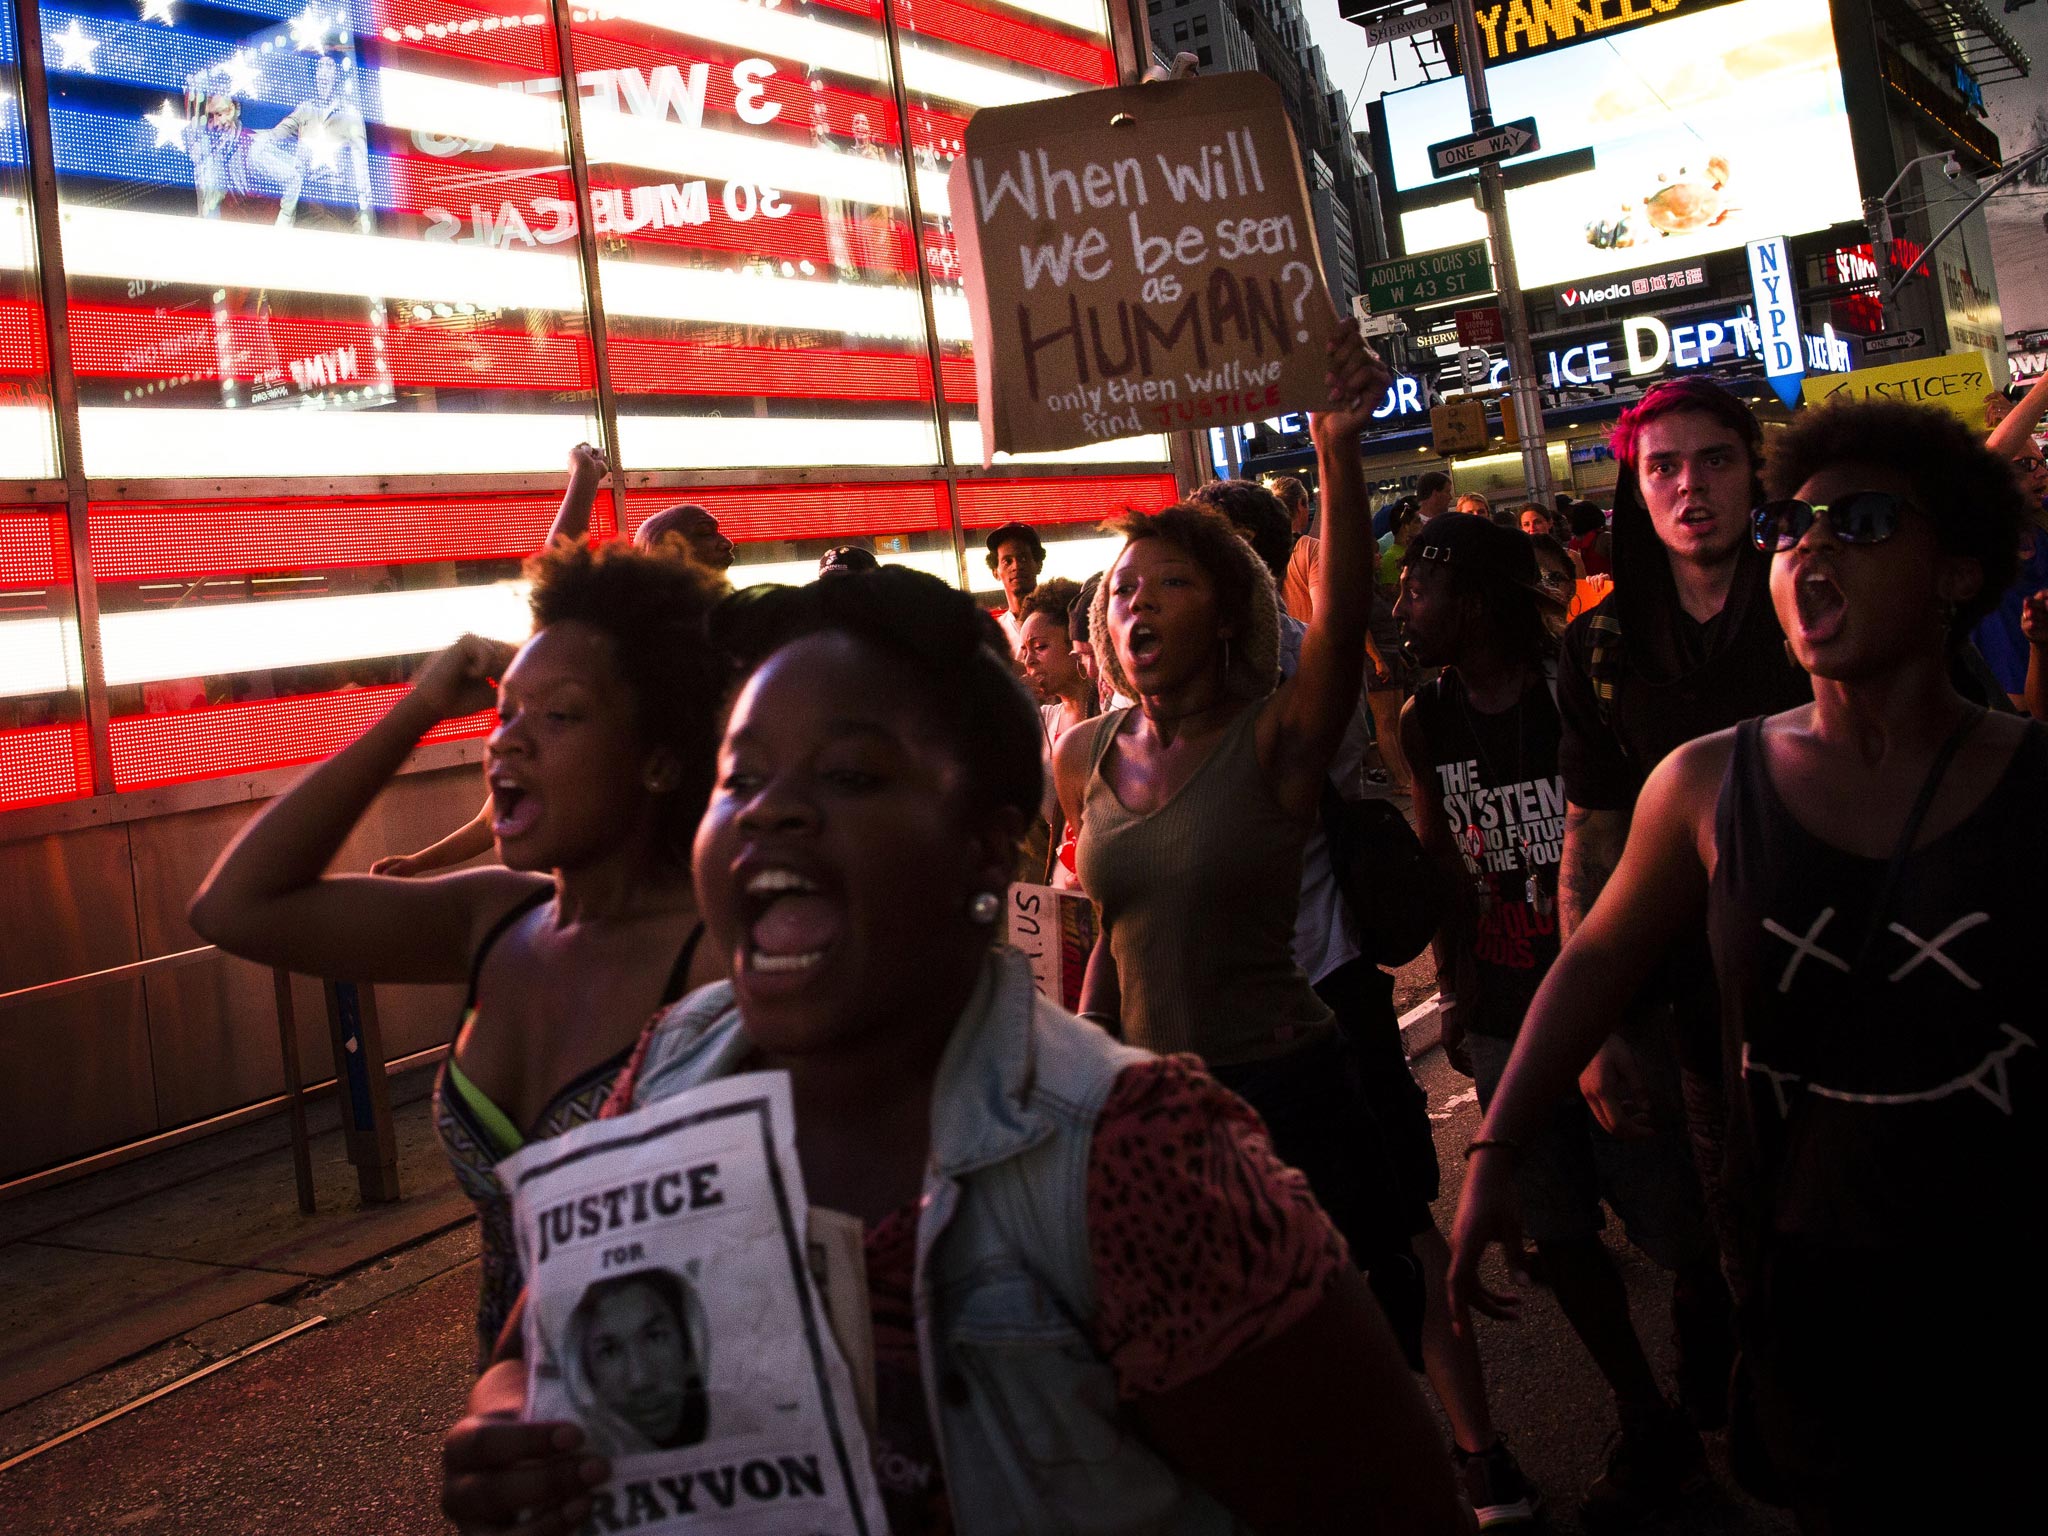 Demonstrators enter Times Square in New York, during a march against the acquittal of neighborhood watch member George Zimmerman in the killing of 17-year-old Trayvon Martin in Florida